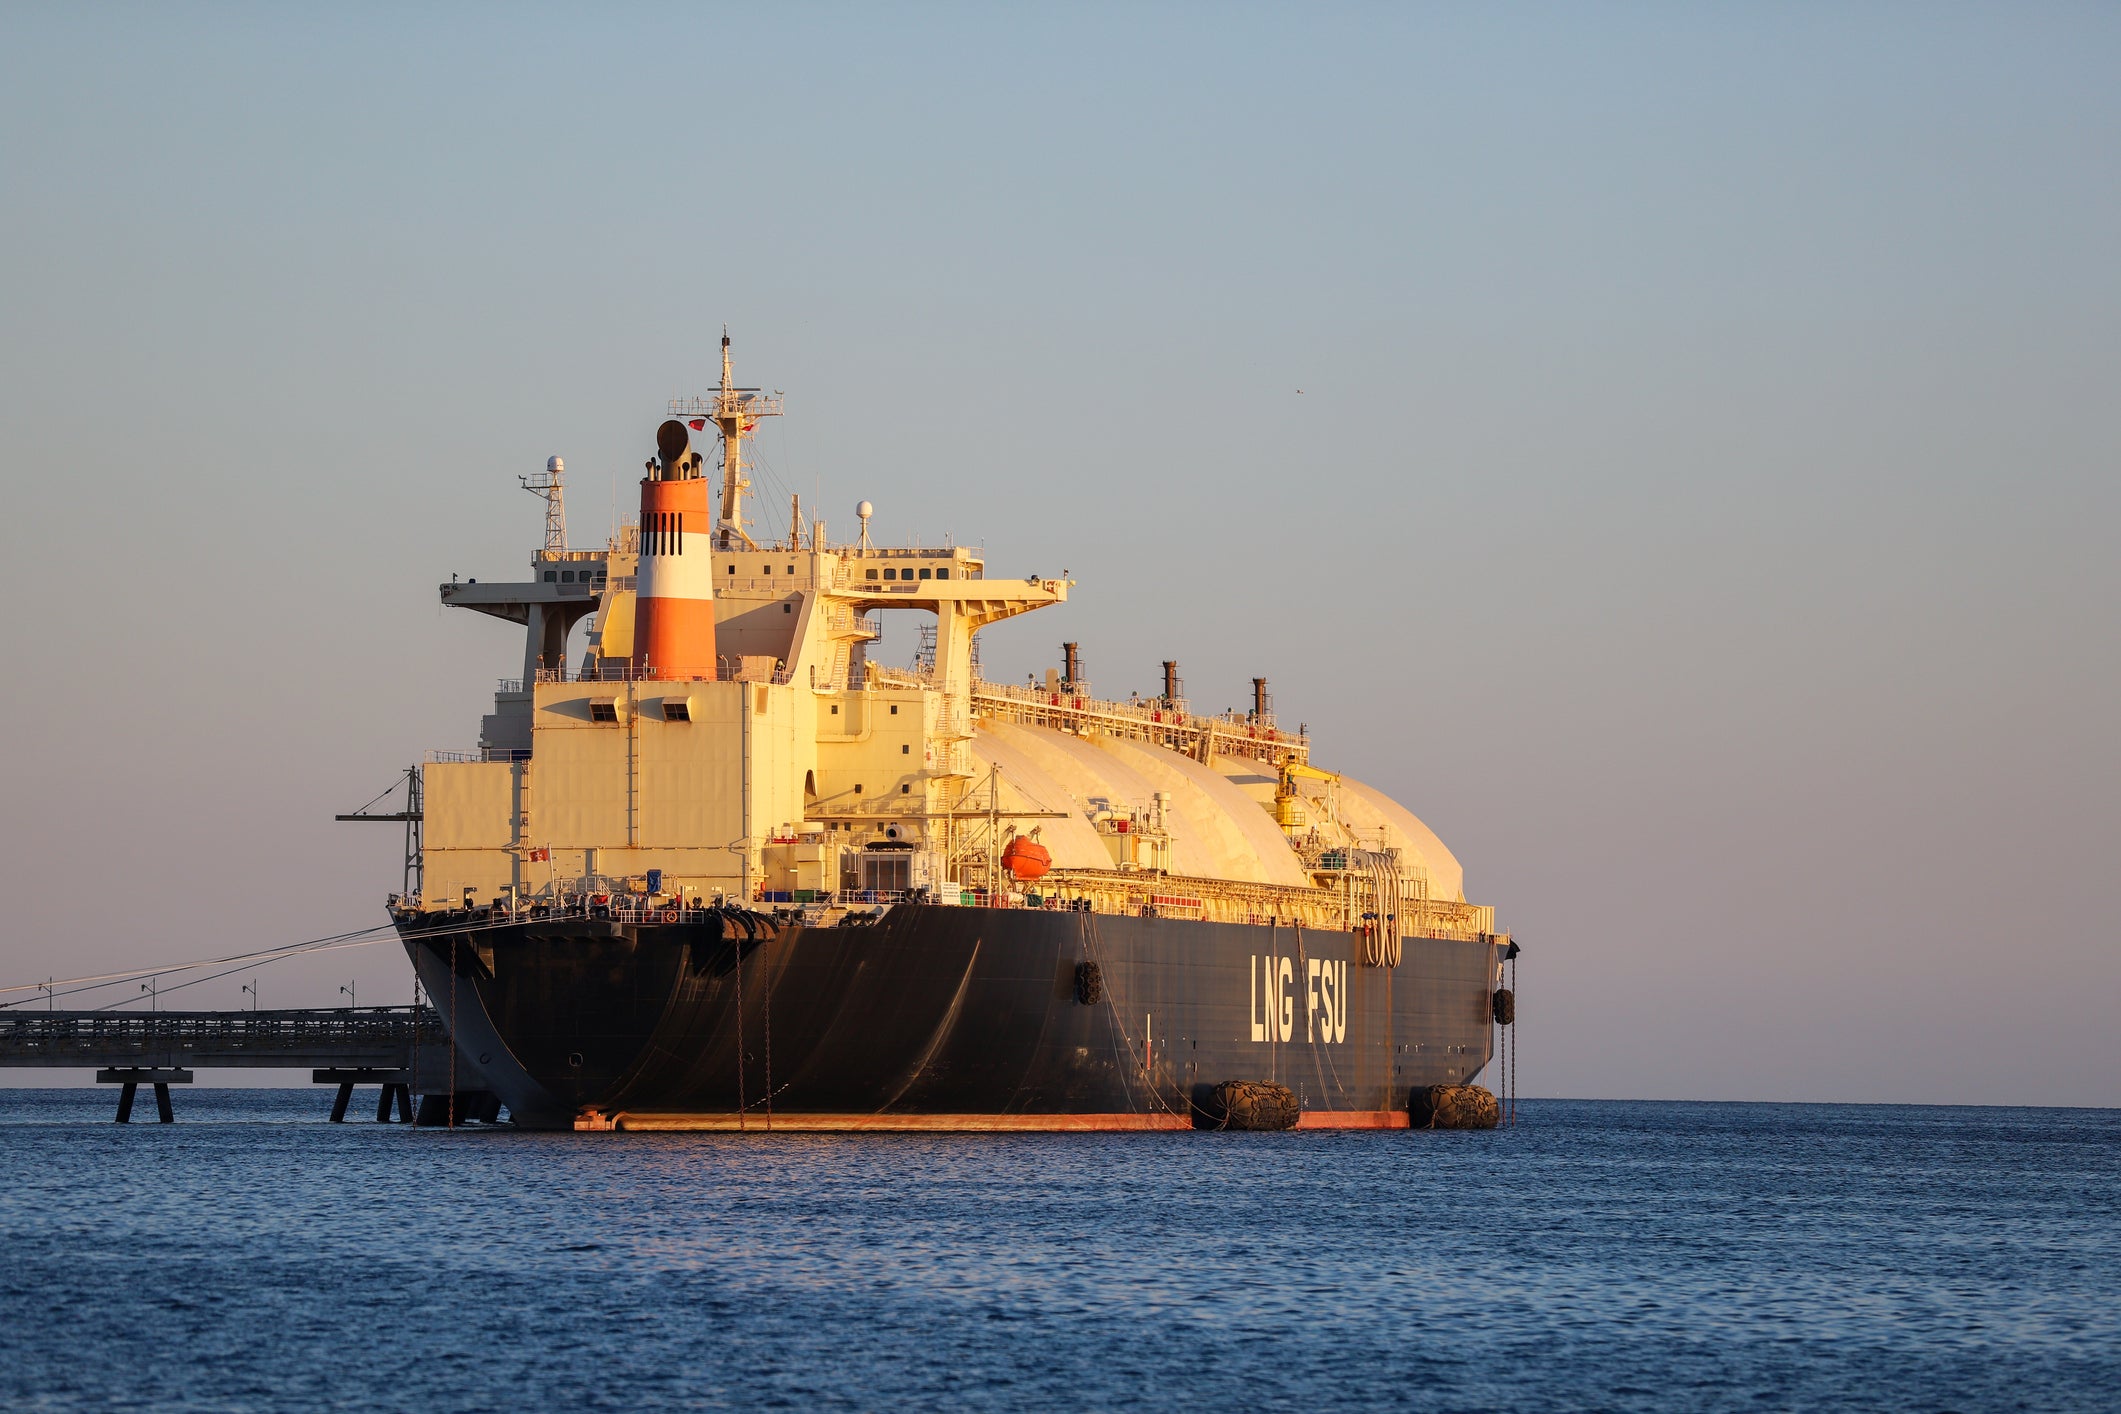 TES, E.ON and ENGIE to manage Germany’s new LNG floating storage unit